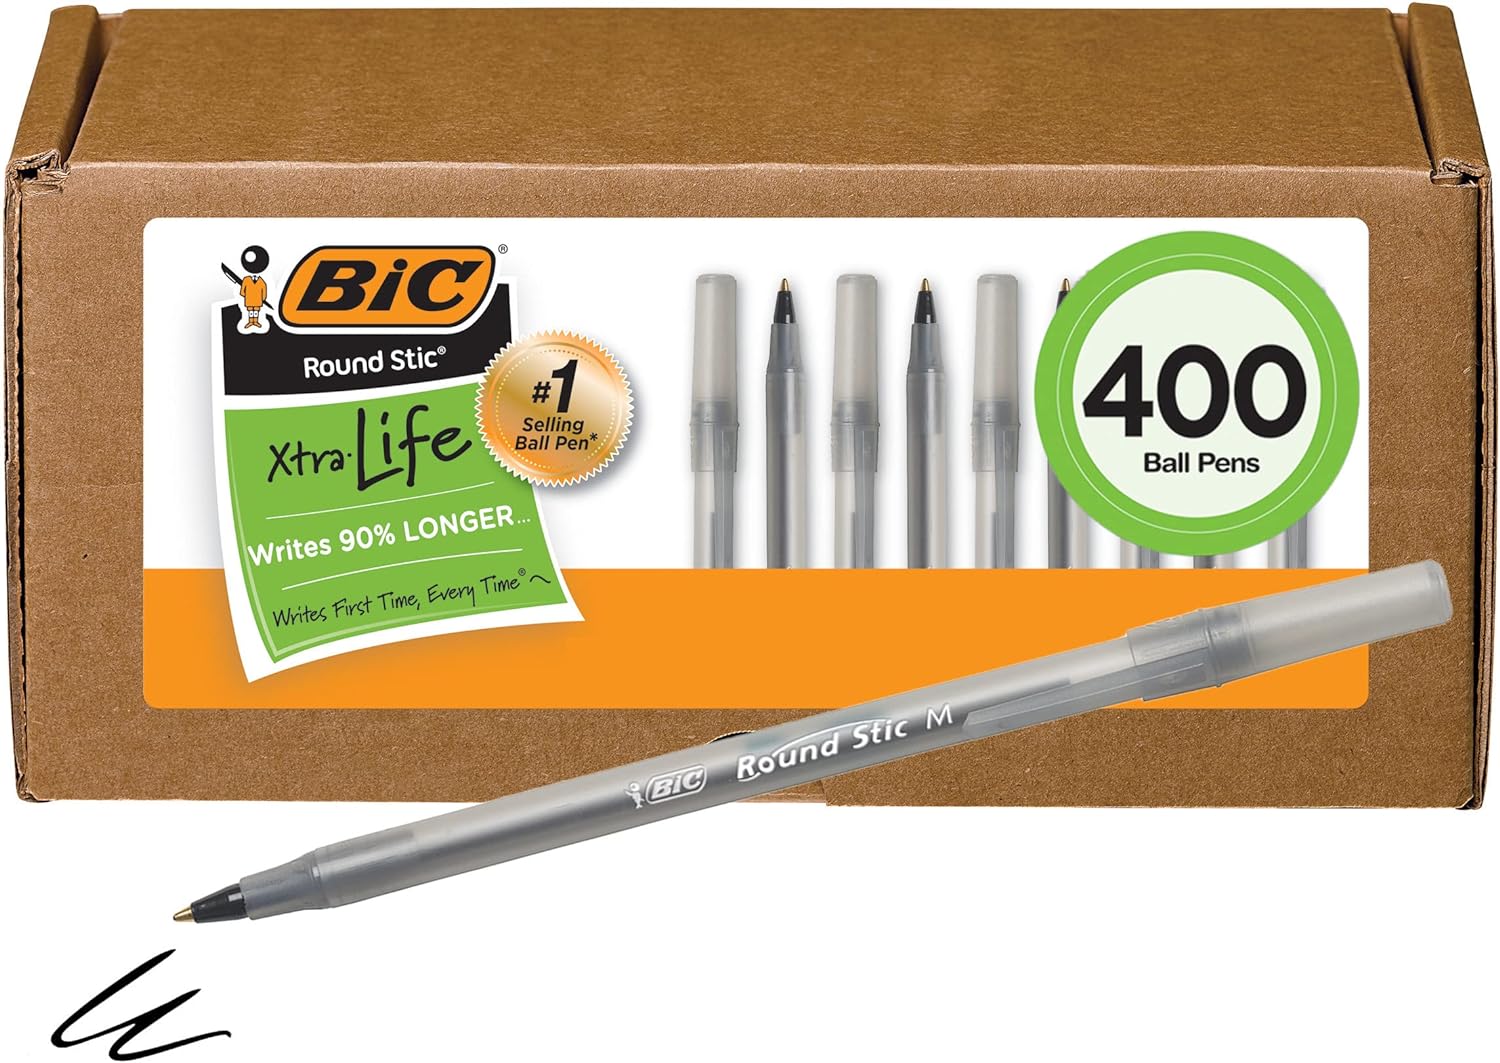 BIC Round Stic Xtra Life Black Ballpoint Pens, Medium Point (1.0mm), 400-Count Pack of Bulk Pens, Flexible Round Barrel for Comfortable Writing, No. 1 Selling Ballpoint Pens